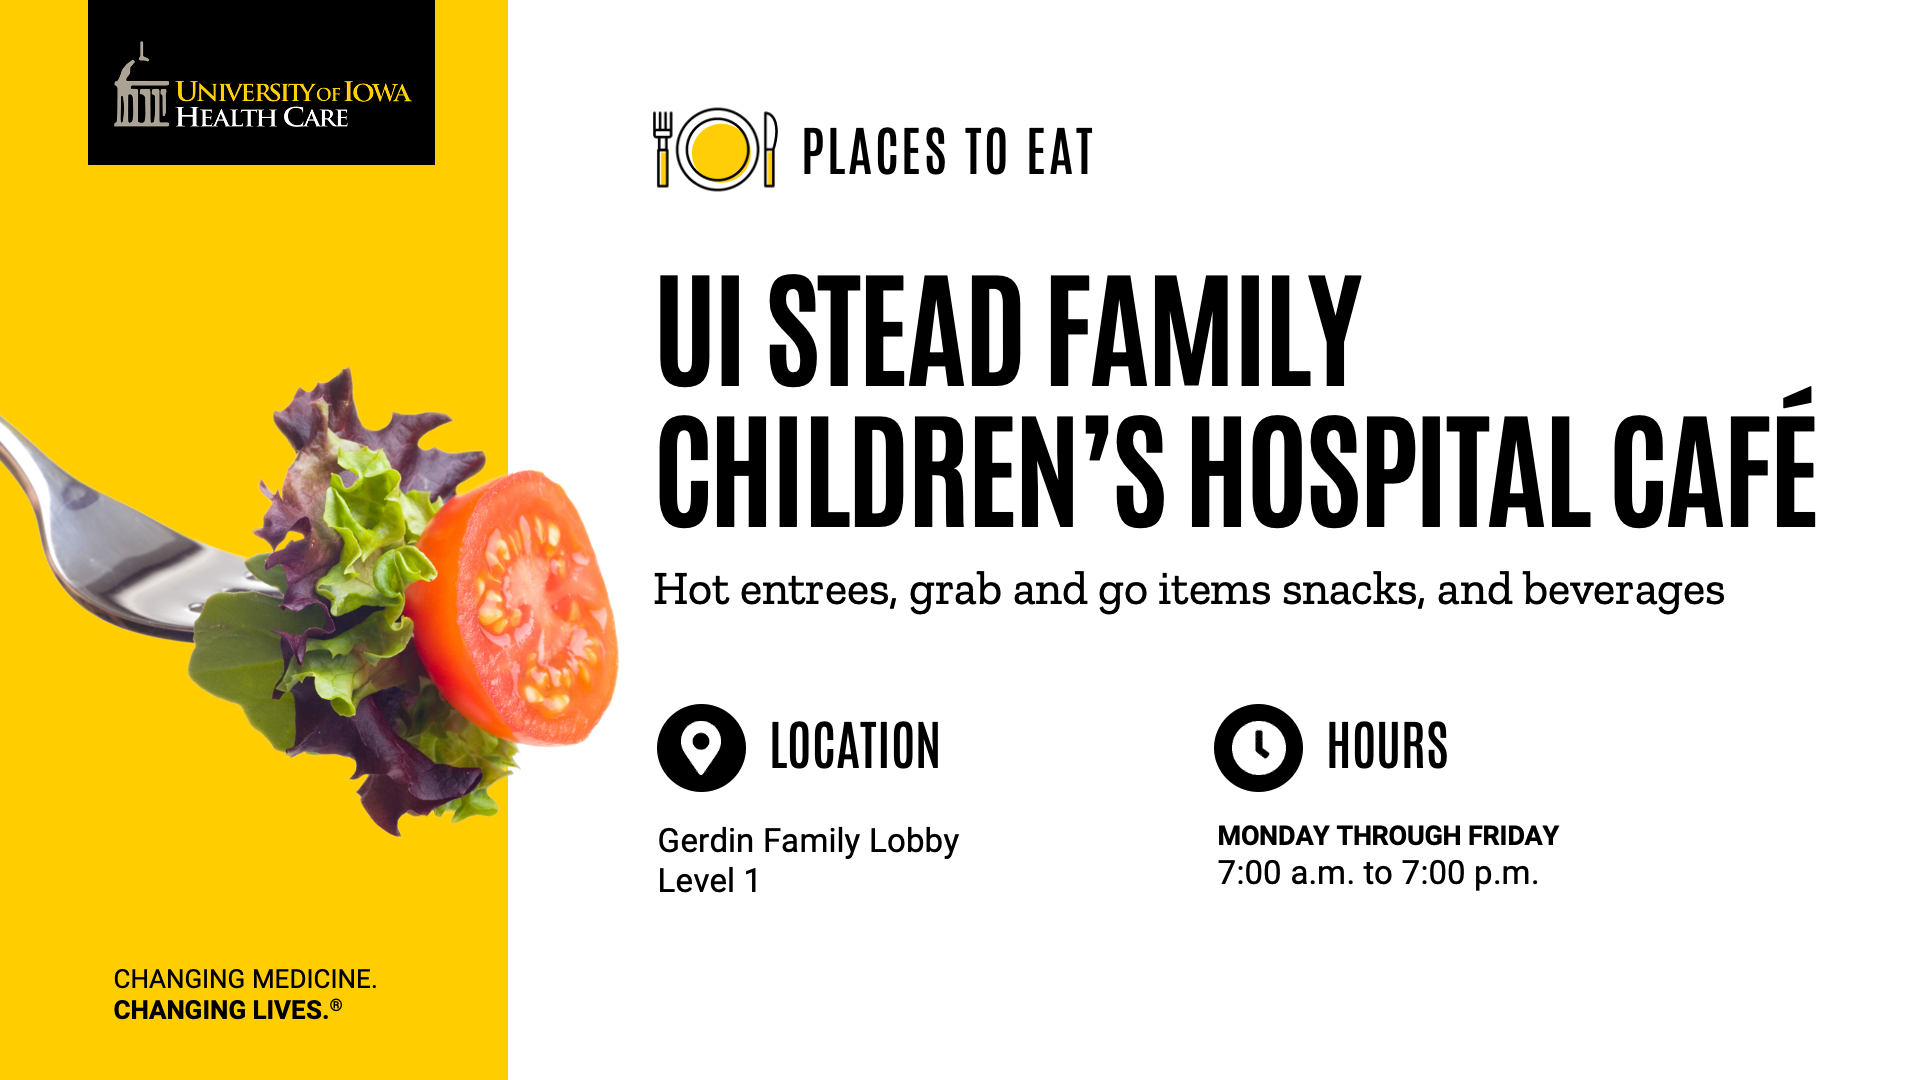 UIHC Cable Slide08 UI STEAD FAMILY CHILDREN’S HOSPITAL CAFÉ